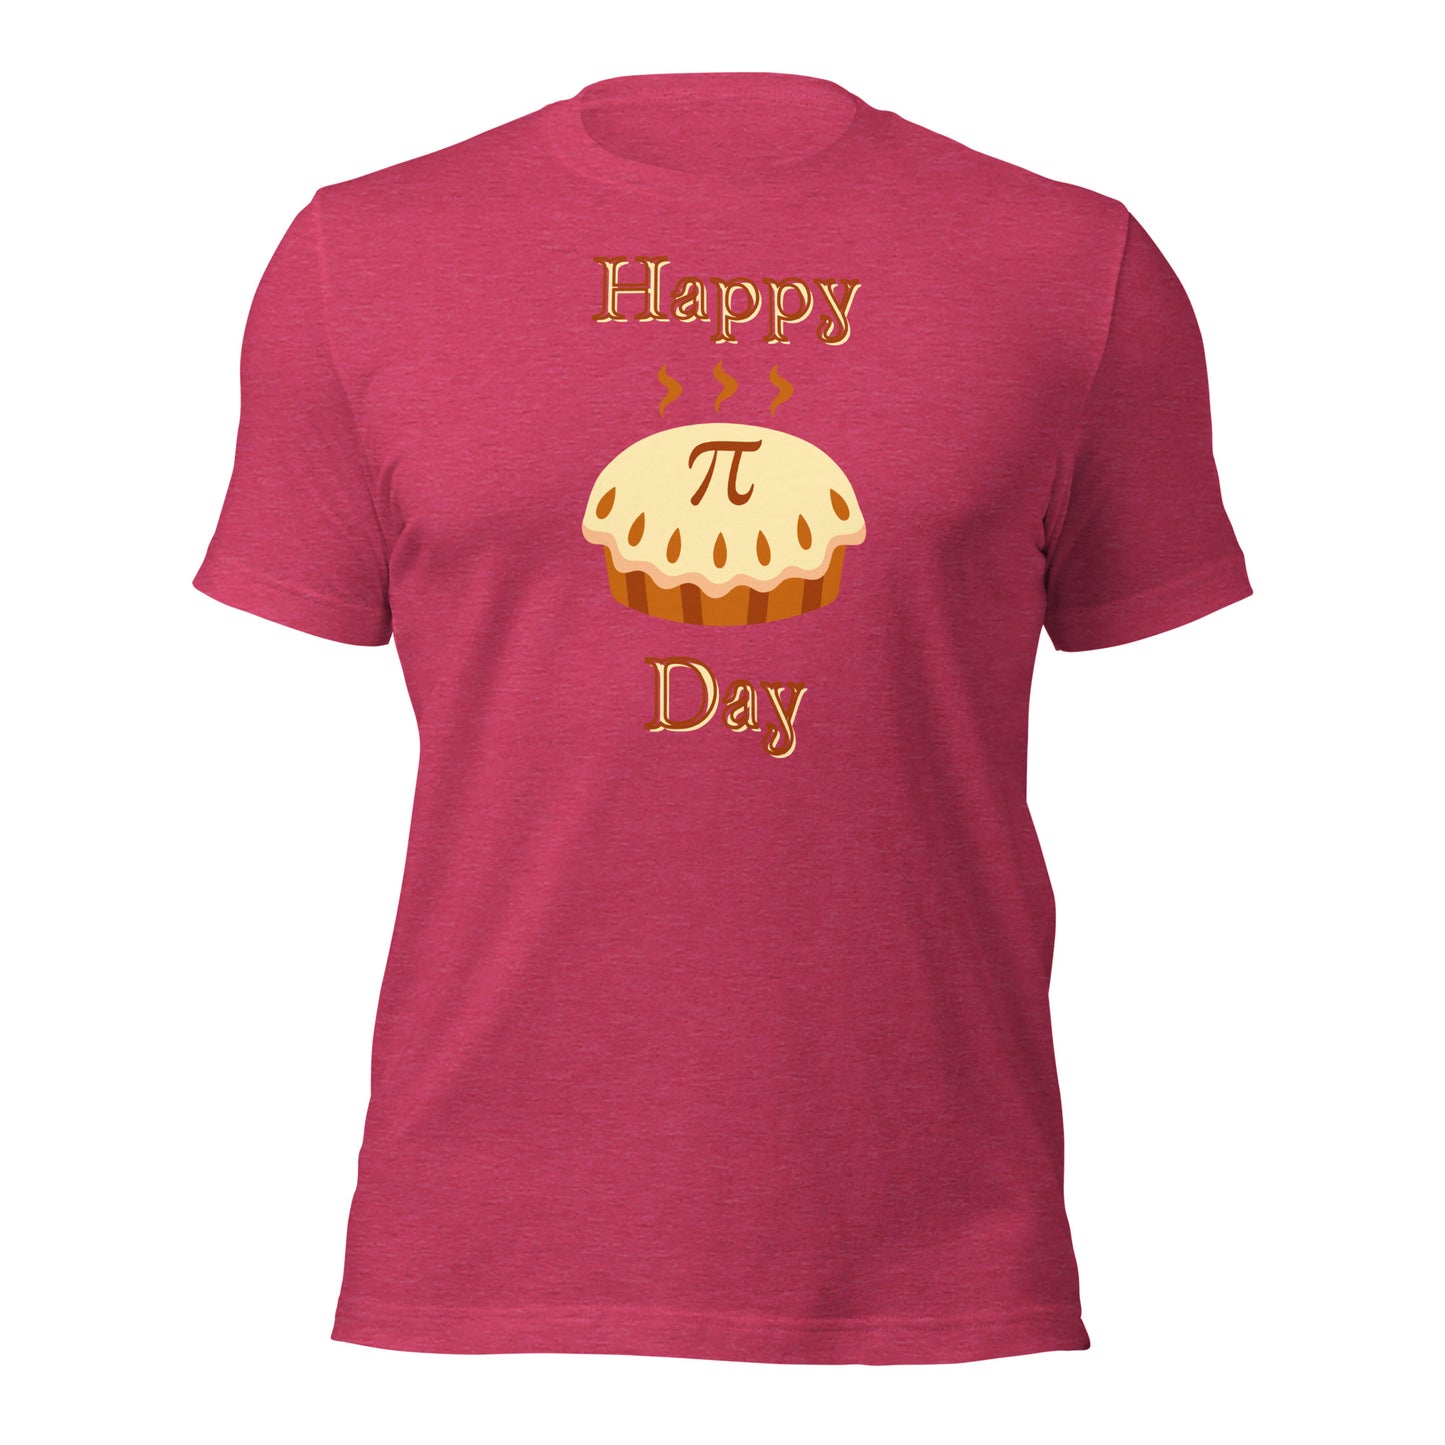 Eco-friendly, made-to-order Pi Day shirt